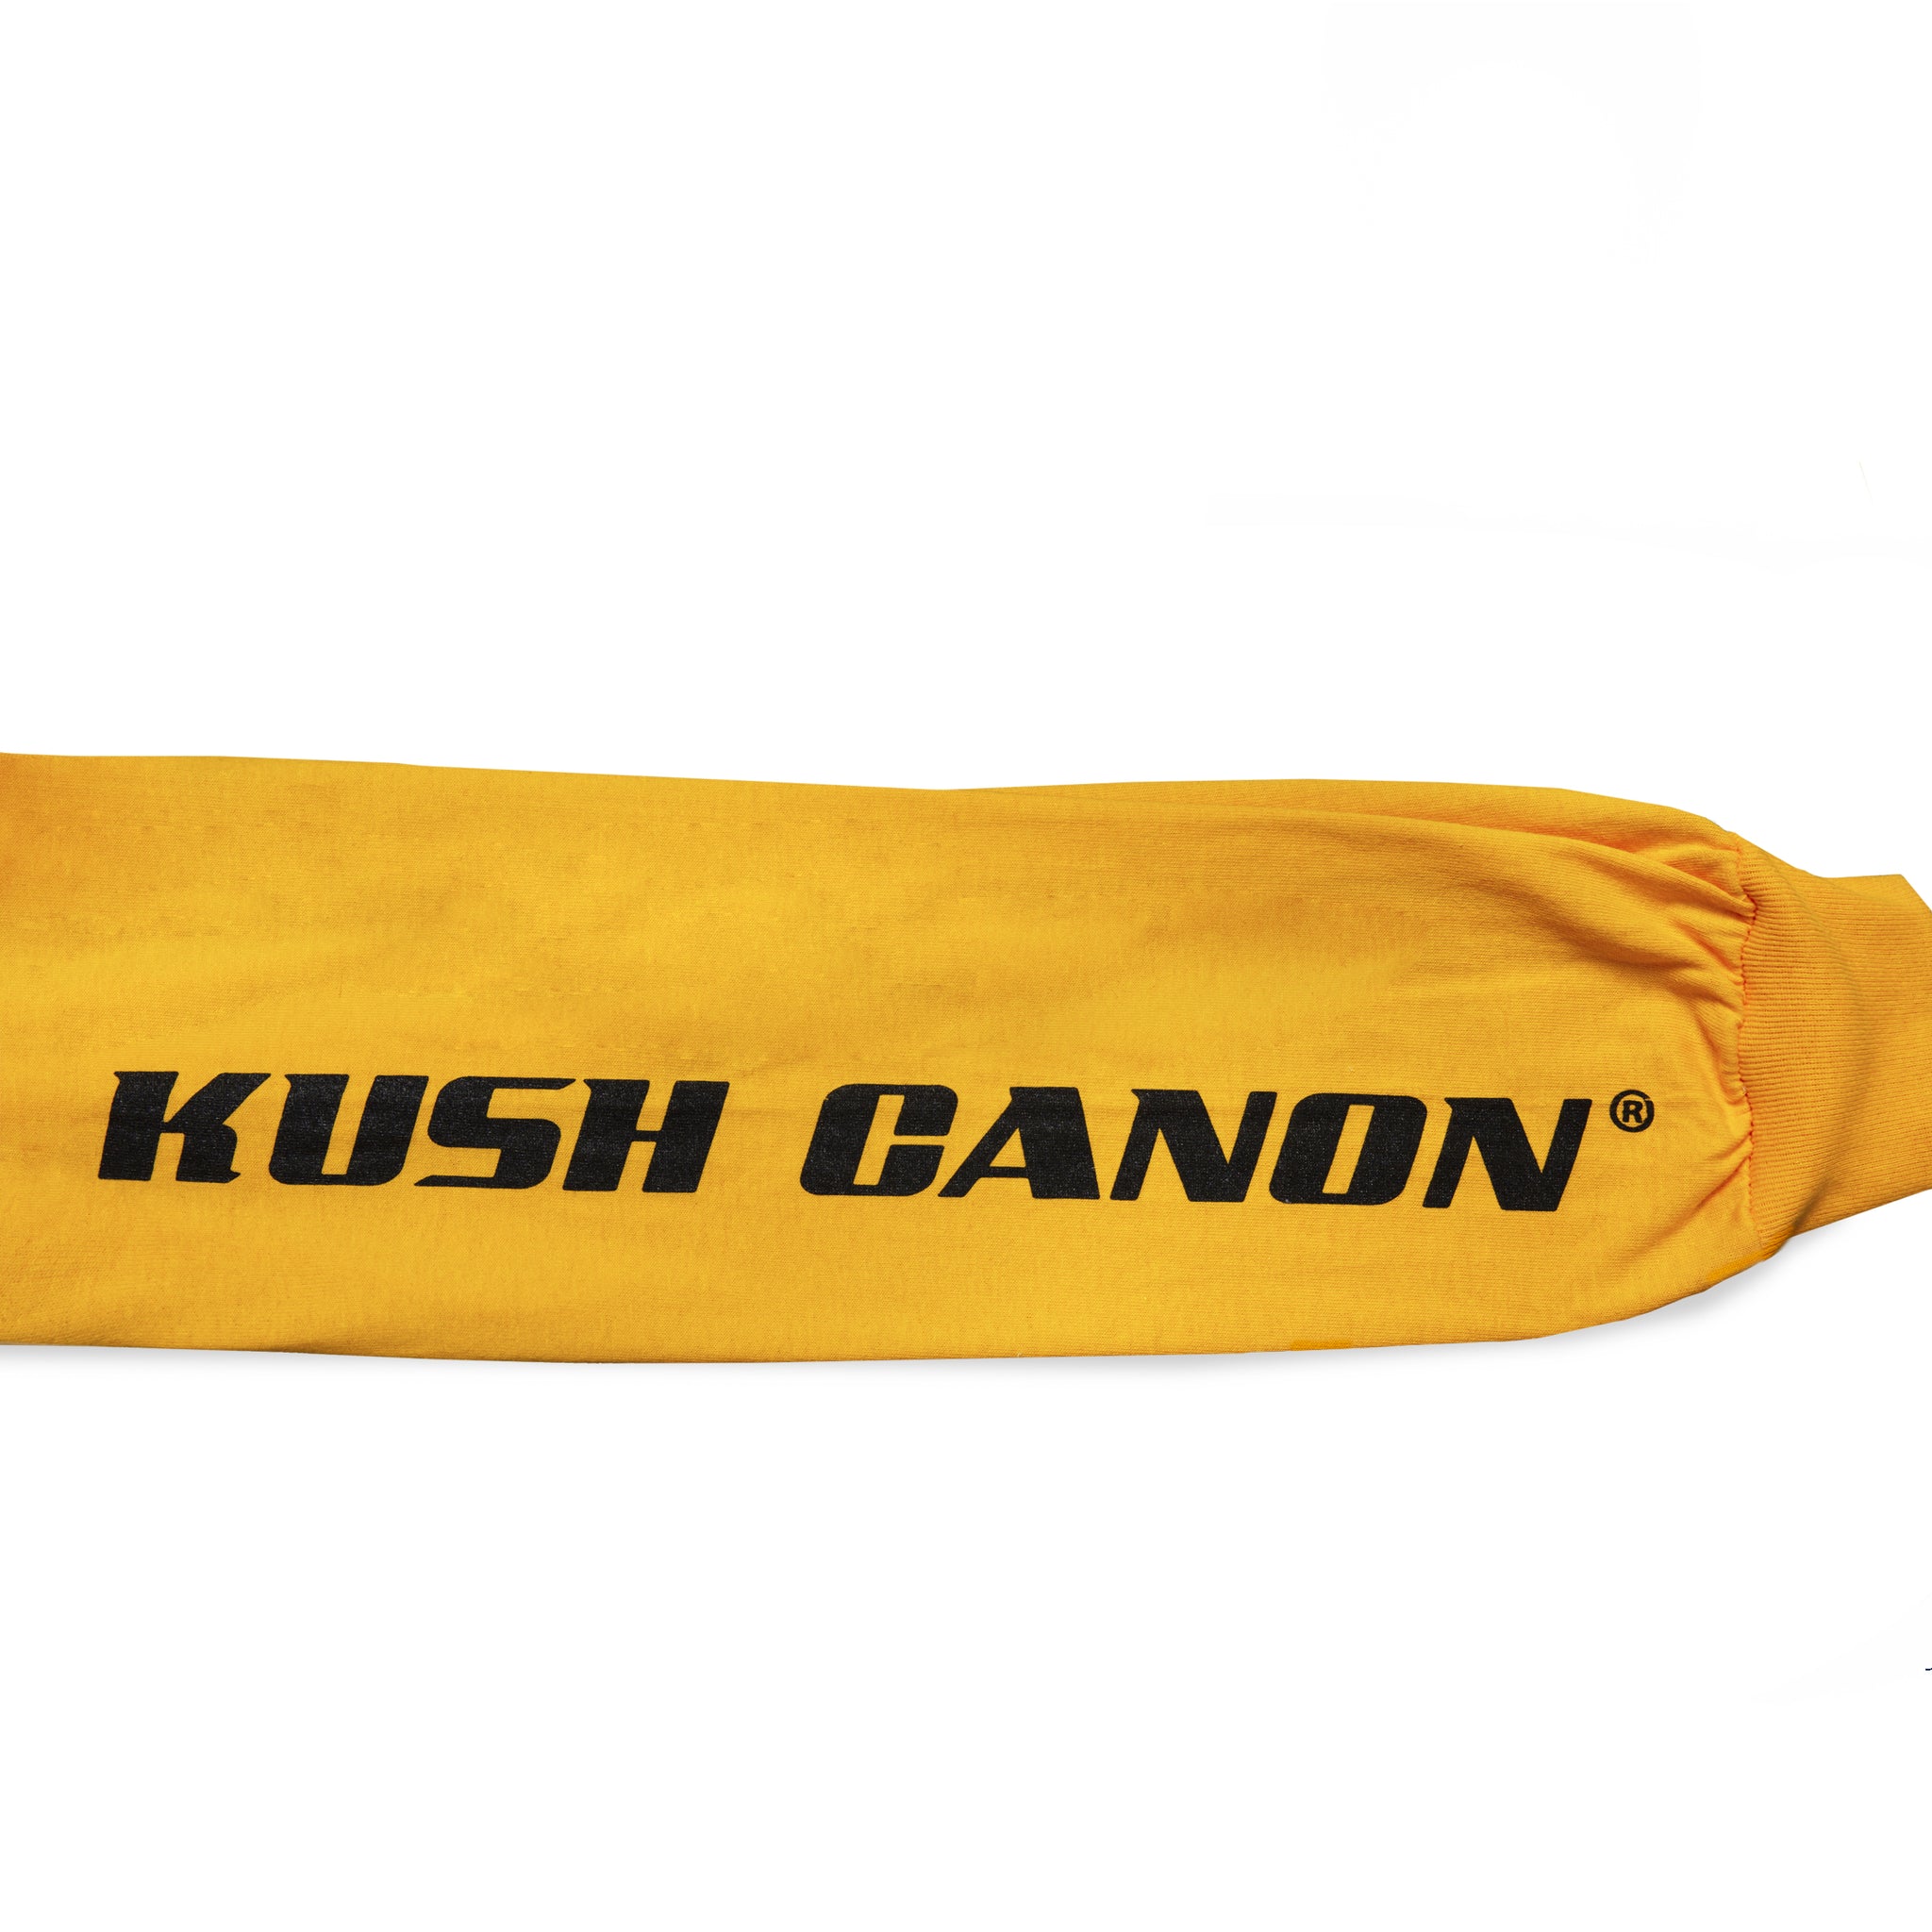 Close-up view of sleeve graphic print of Made in Paradise World Drug Trade Collection "KUSH CANON" yellow long sleeve t-shirt